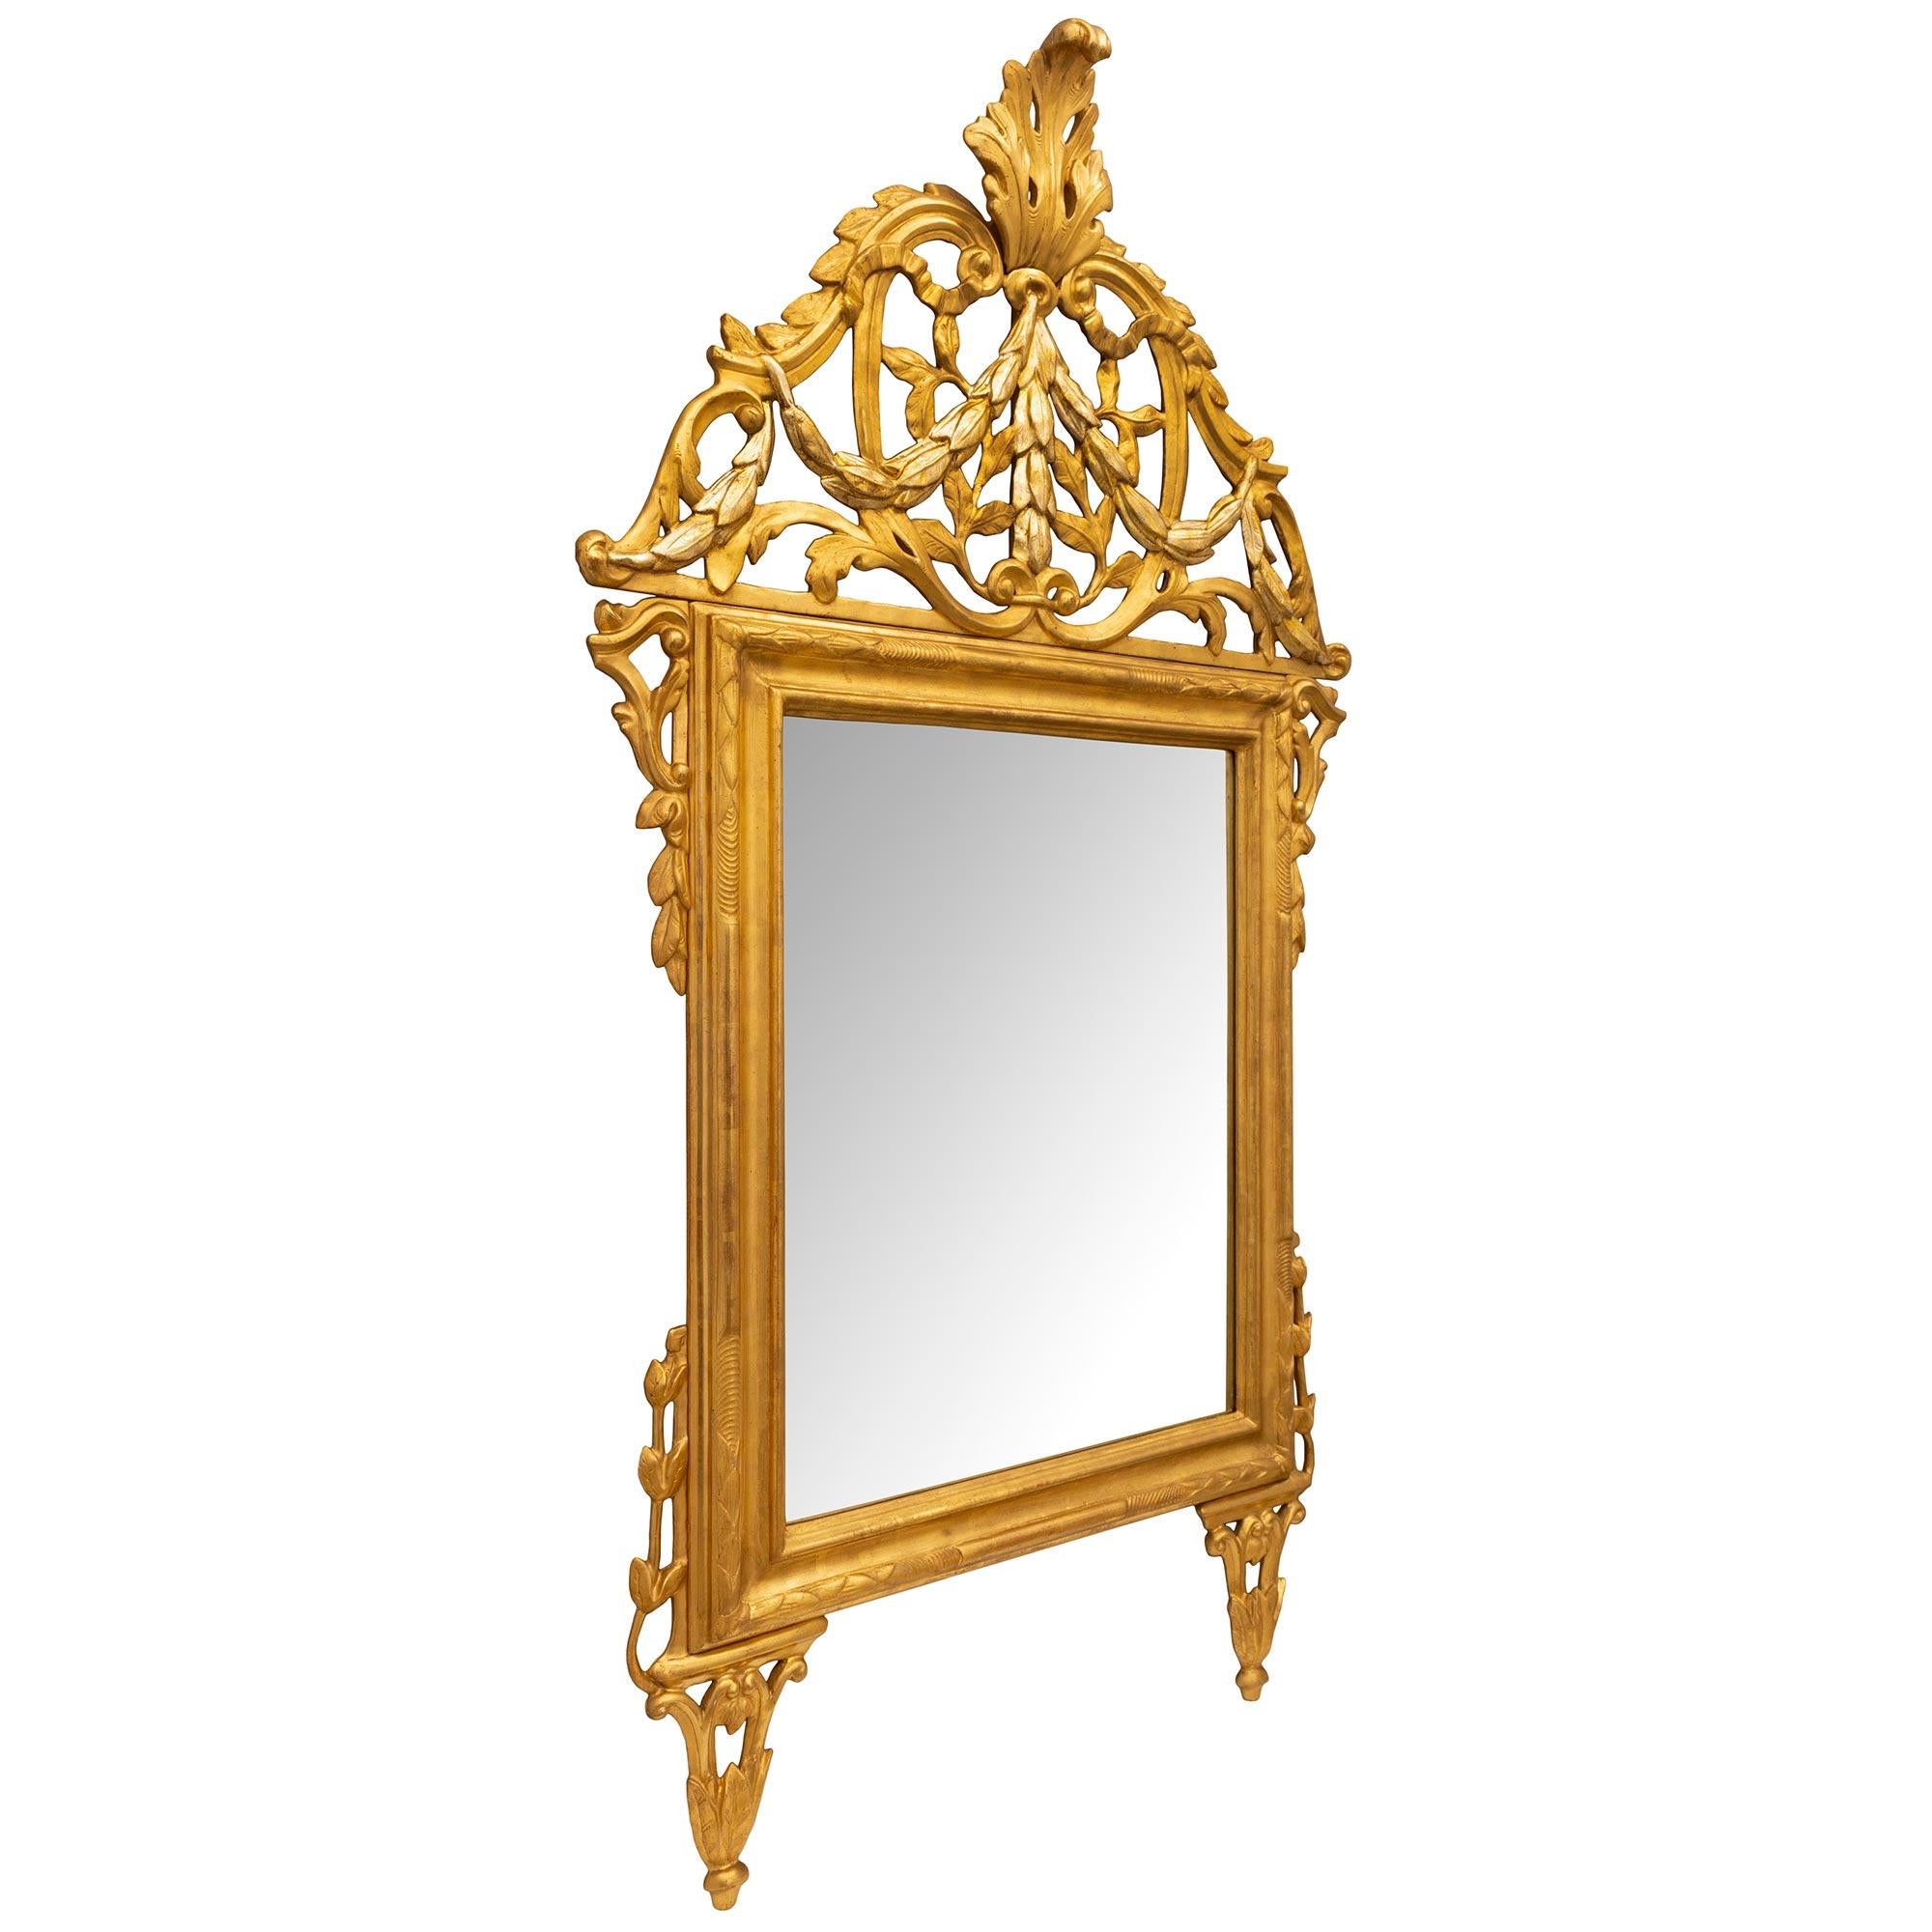 A beautiful Italian 18th century Louis XIV period Giltwood and silvered Mecca mirror. The mirror is raised on pierced tapering triangular shaped feet decorated by leaves and scrolled designs. Above is its original mirror plate which is framed within